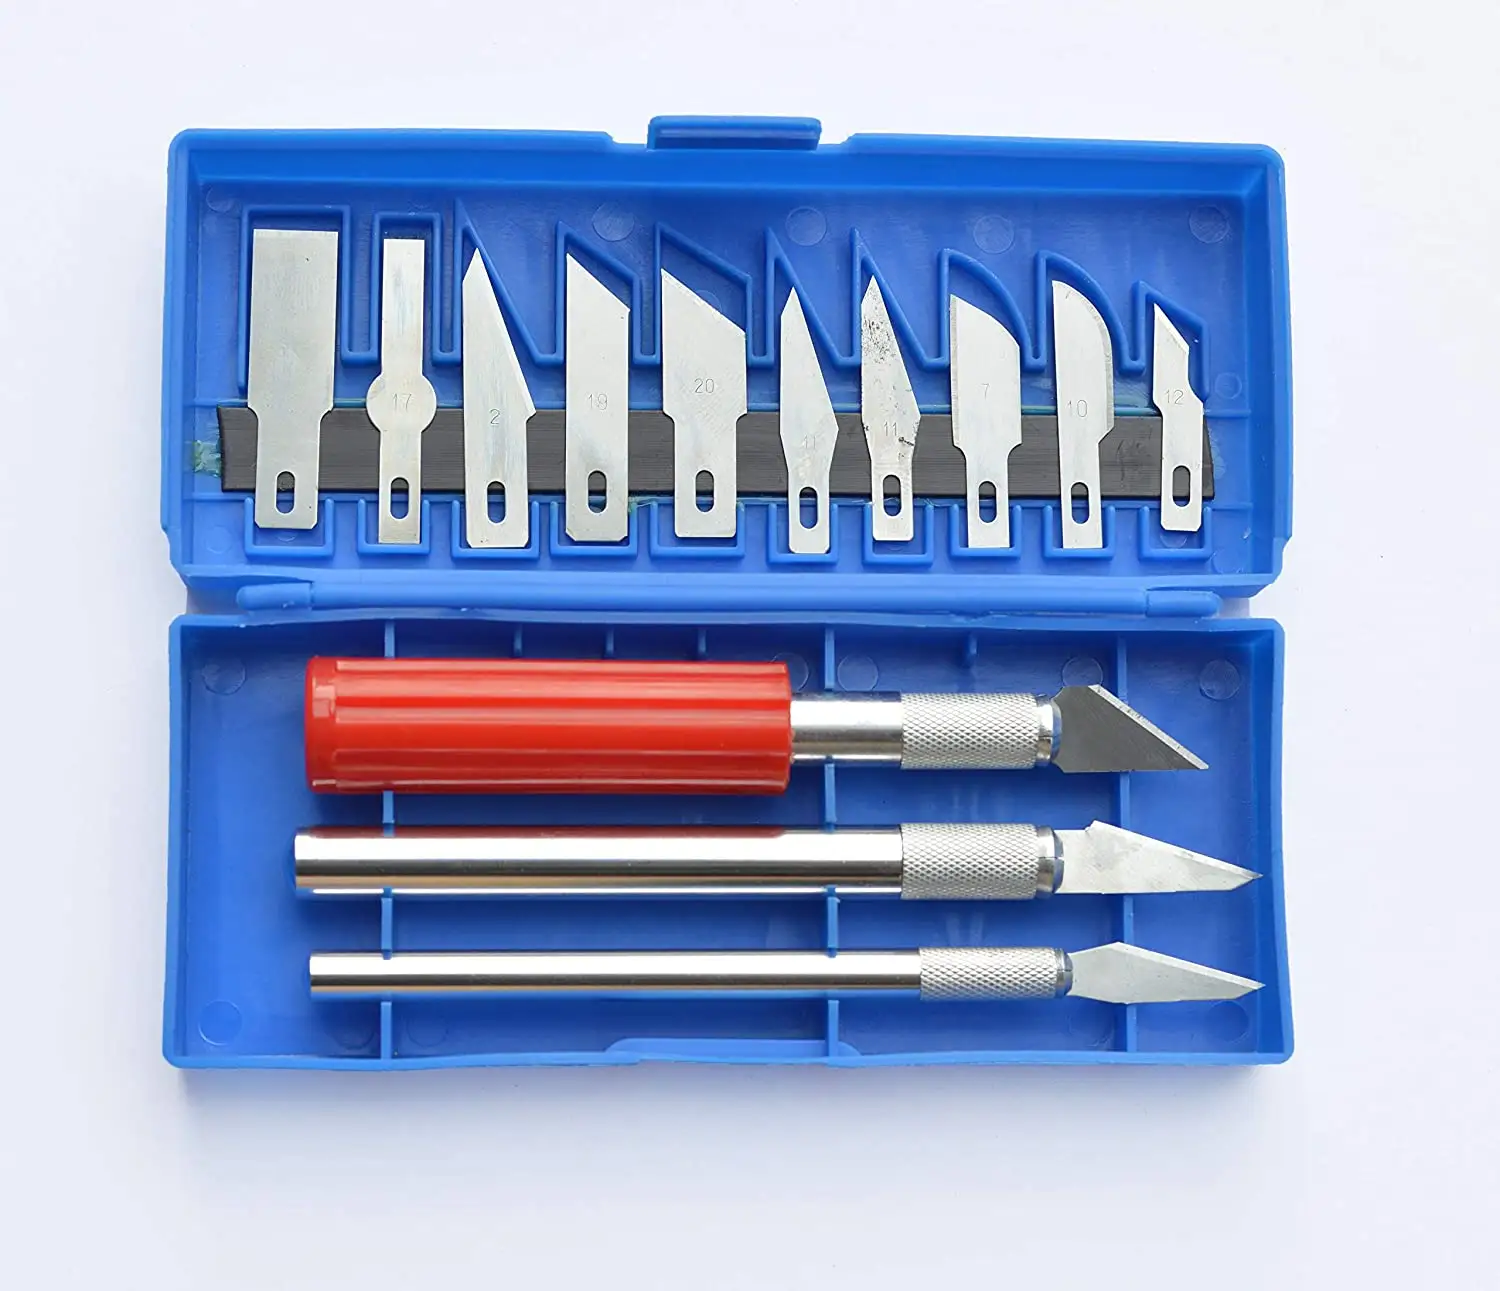 21428 Precision carving tool Craft Cutter Hobby Knives Set for professional razors art lovers